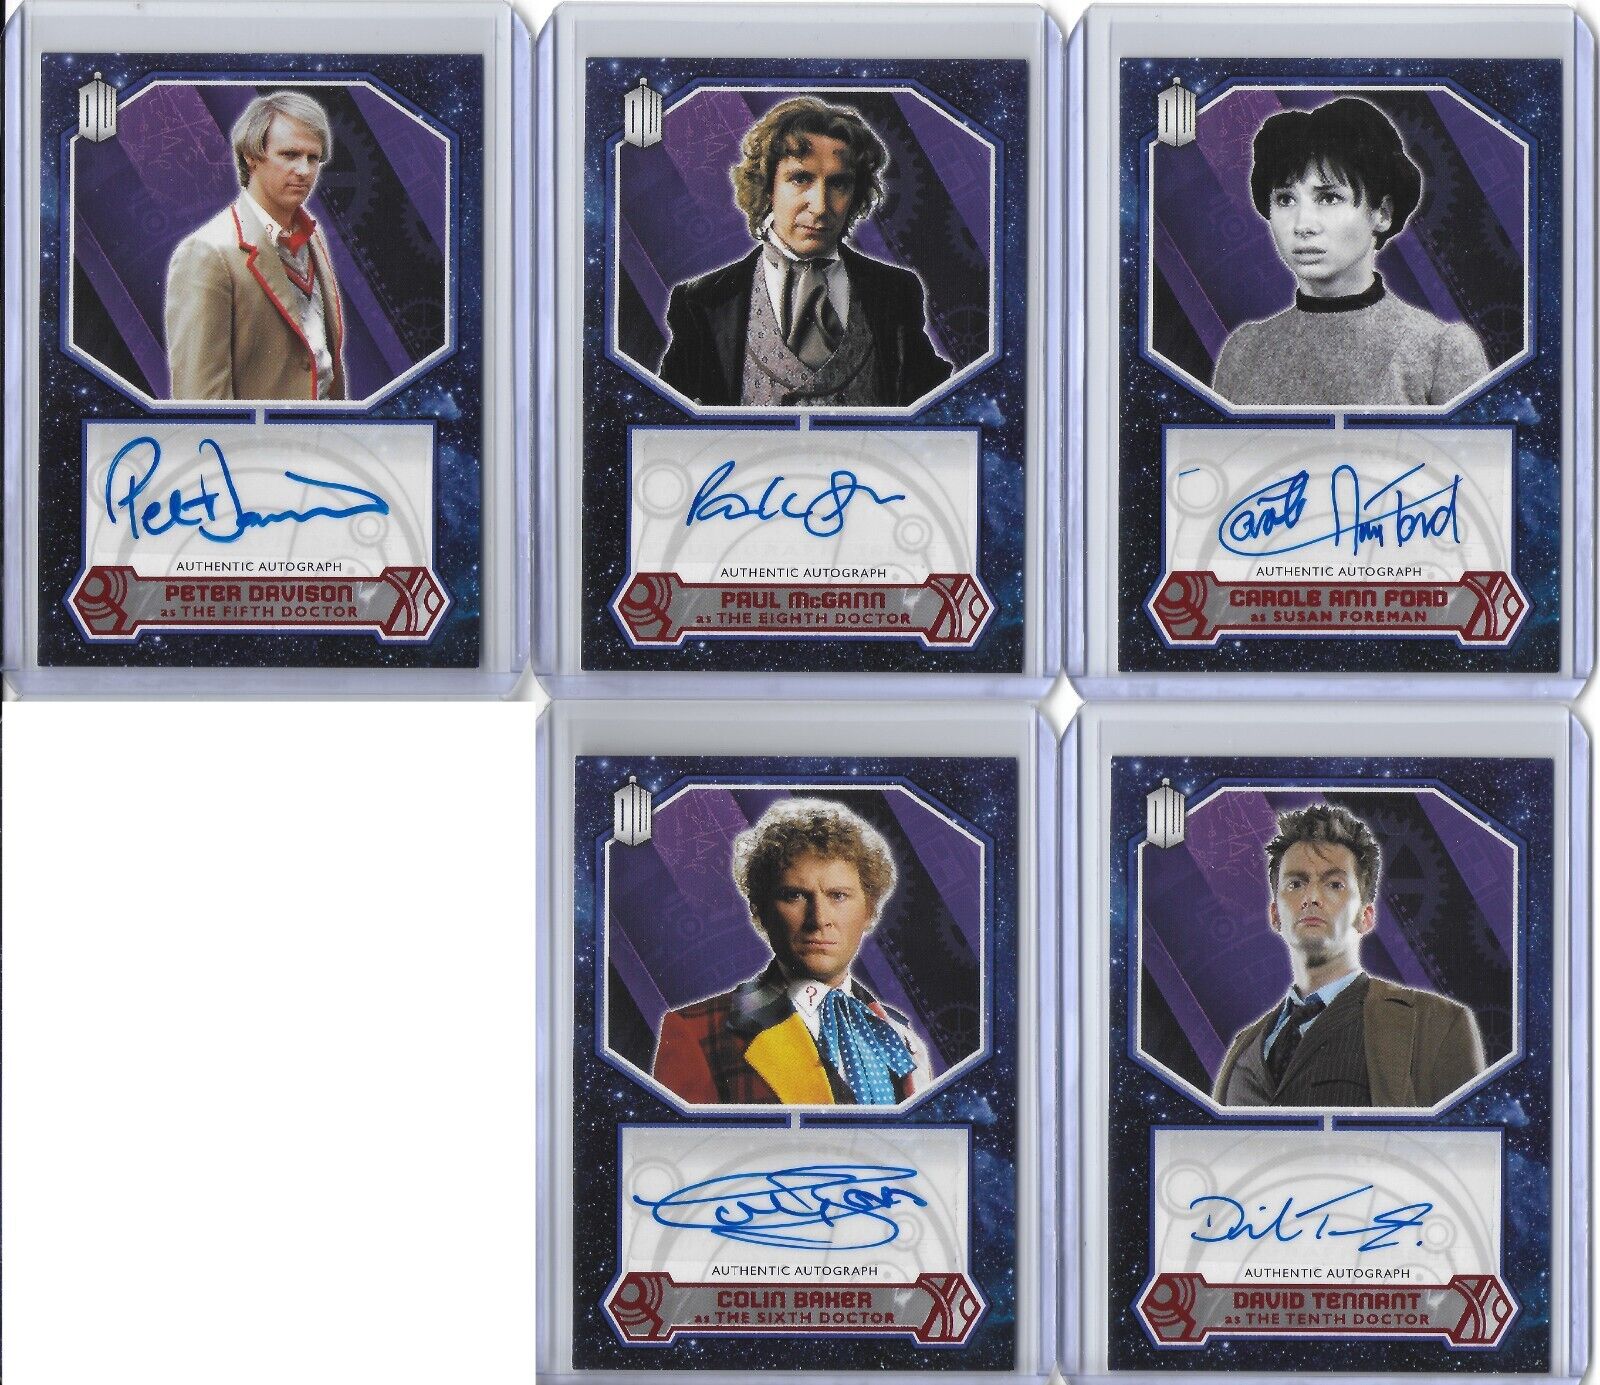 2015 Topps BBC Dr Doctor Who Autograph Cards - Blue #/50, Purple #/25, Red #/10